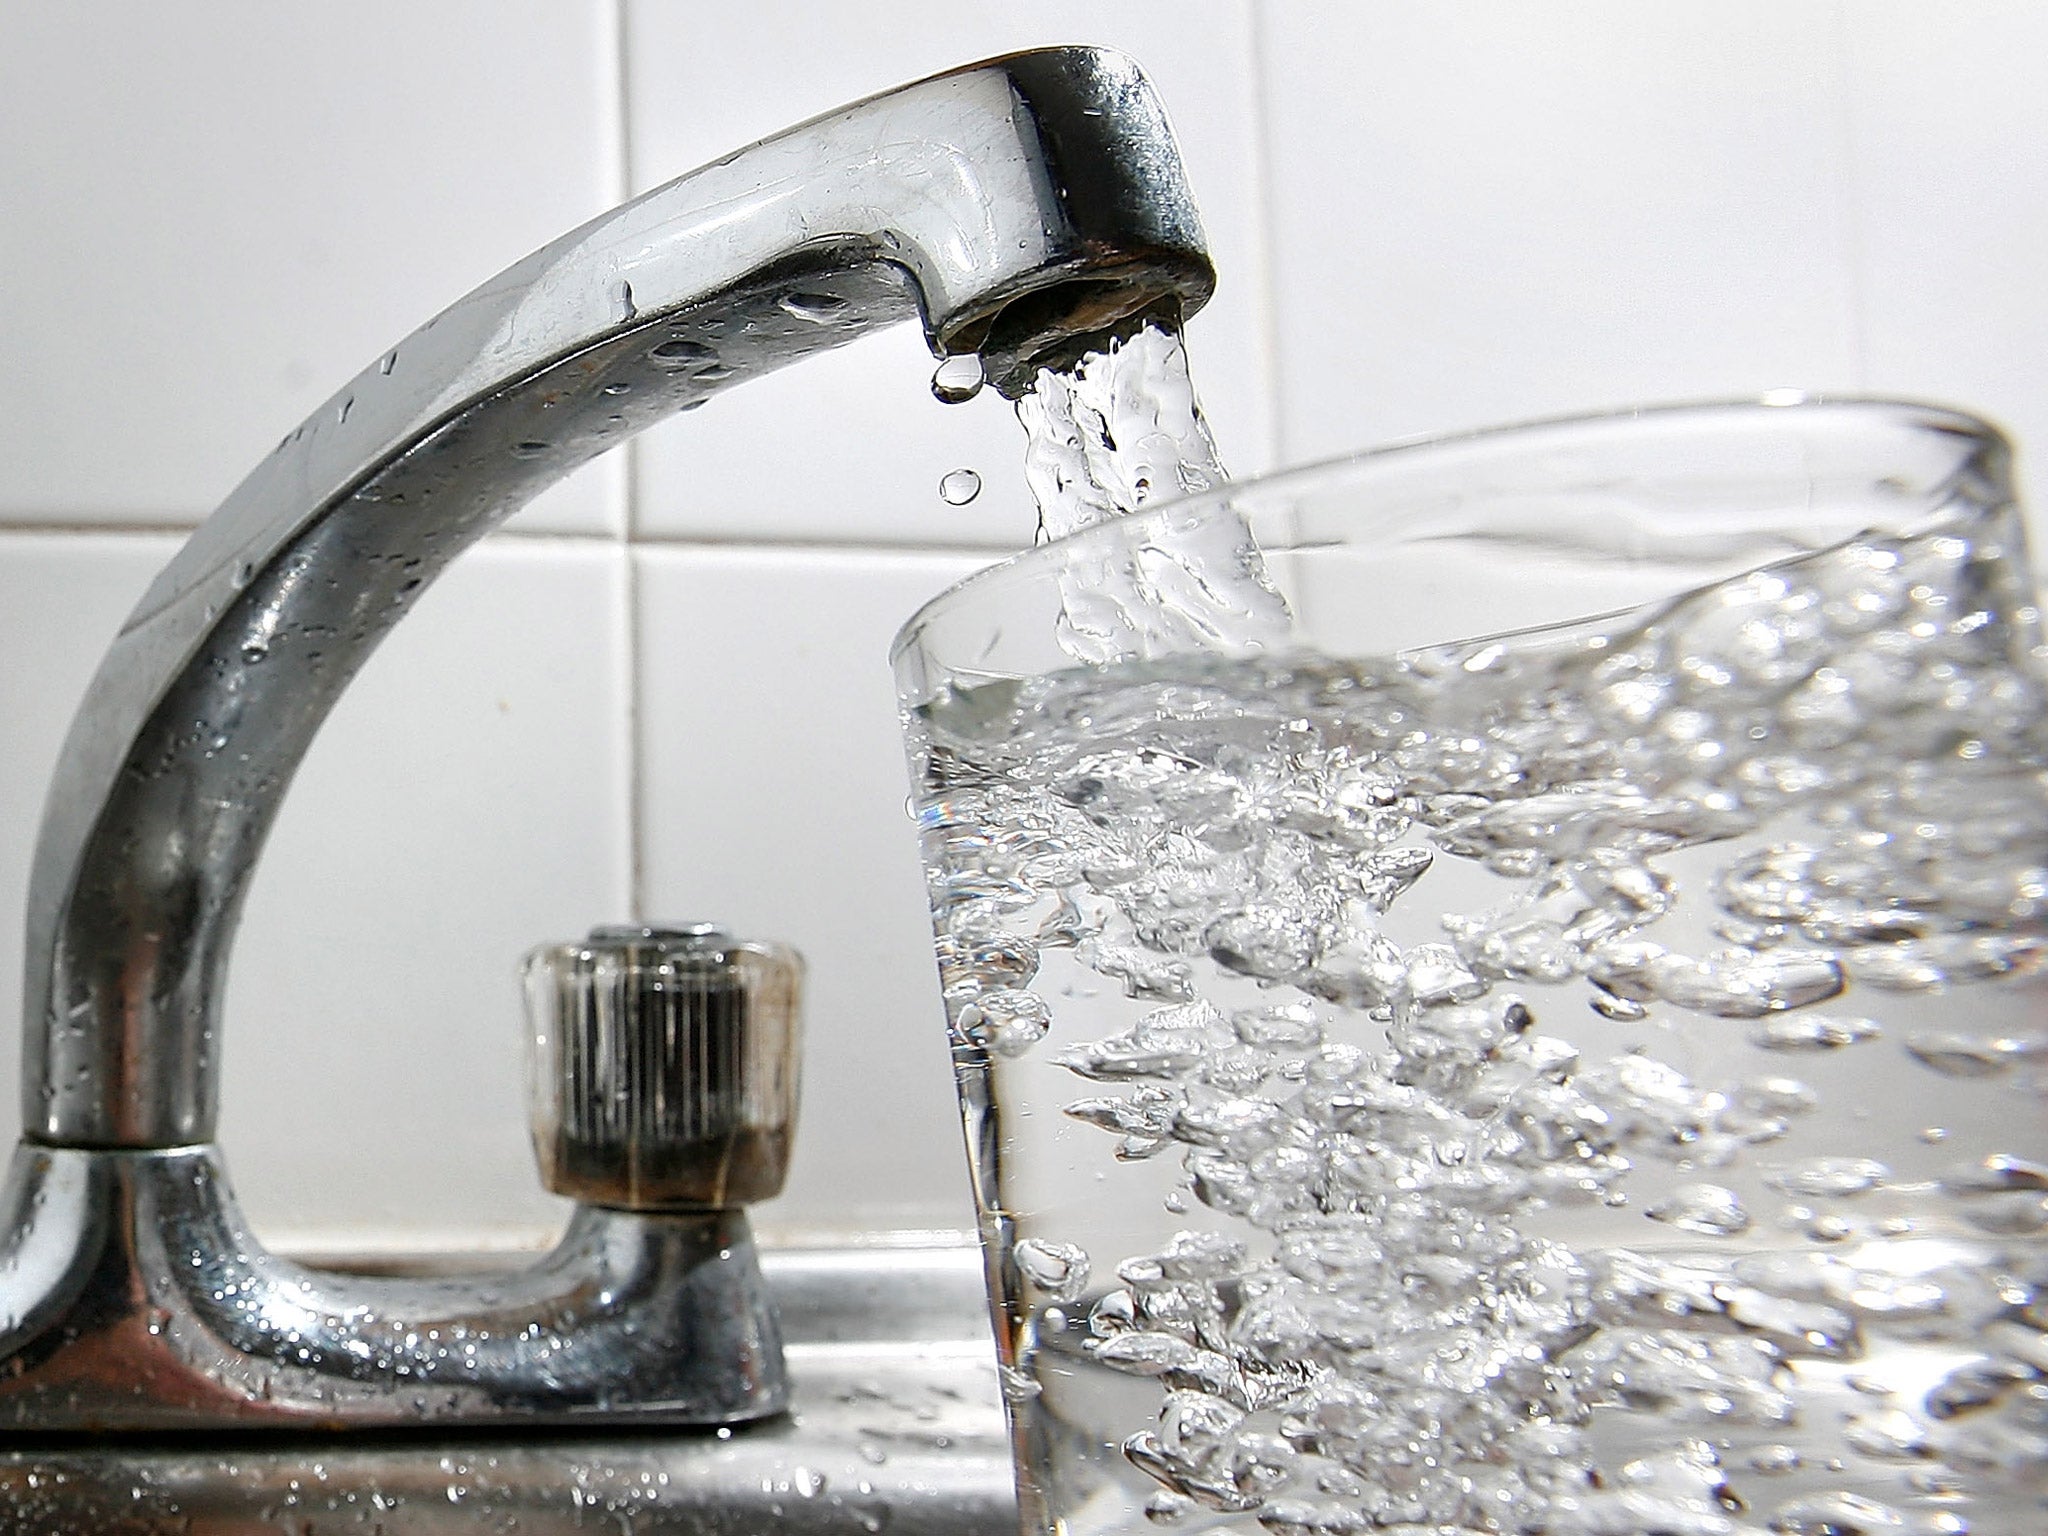 In England, 15 out of 152 local authorities have water fluoridation schemes in place